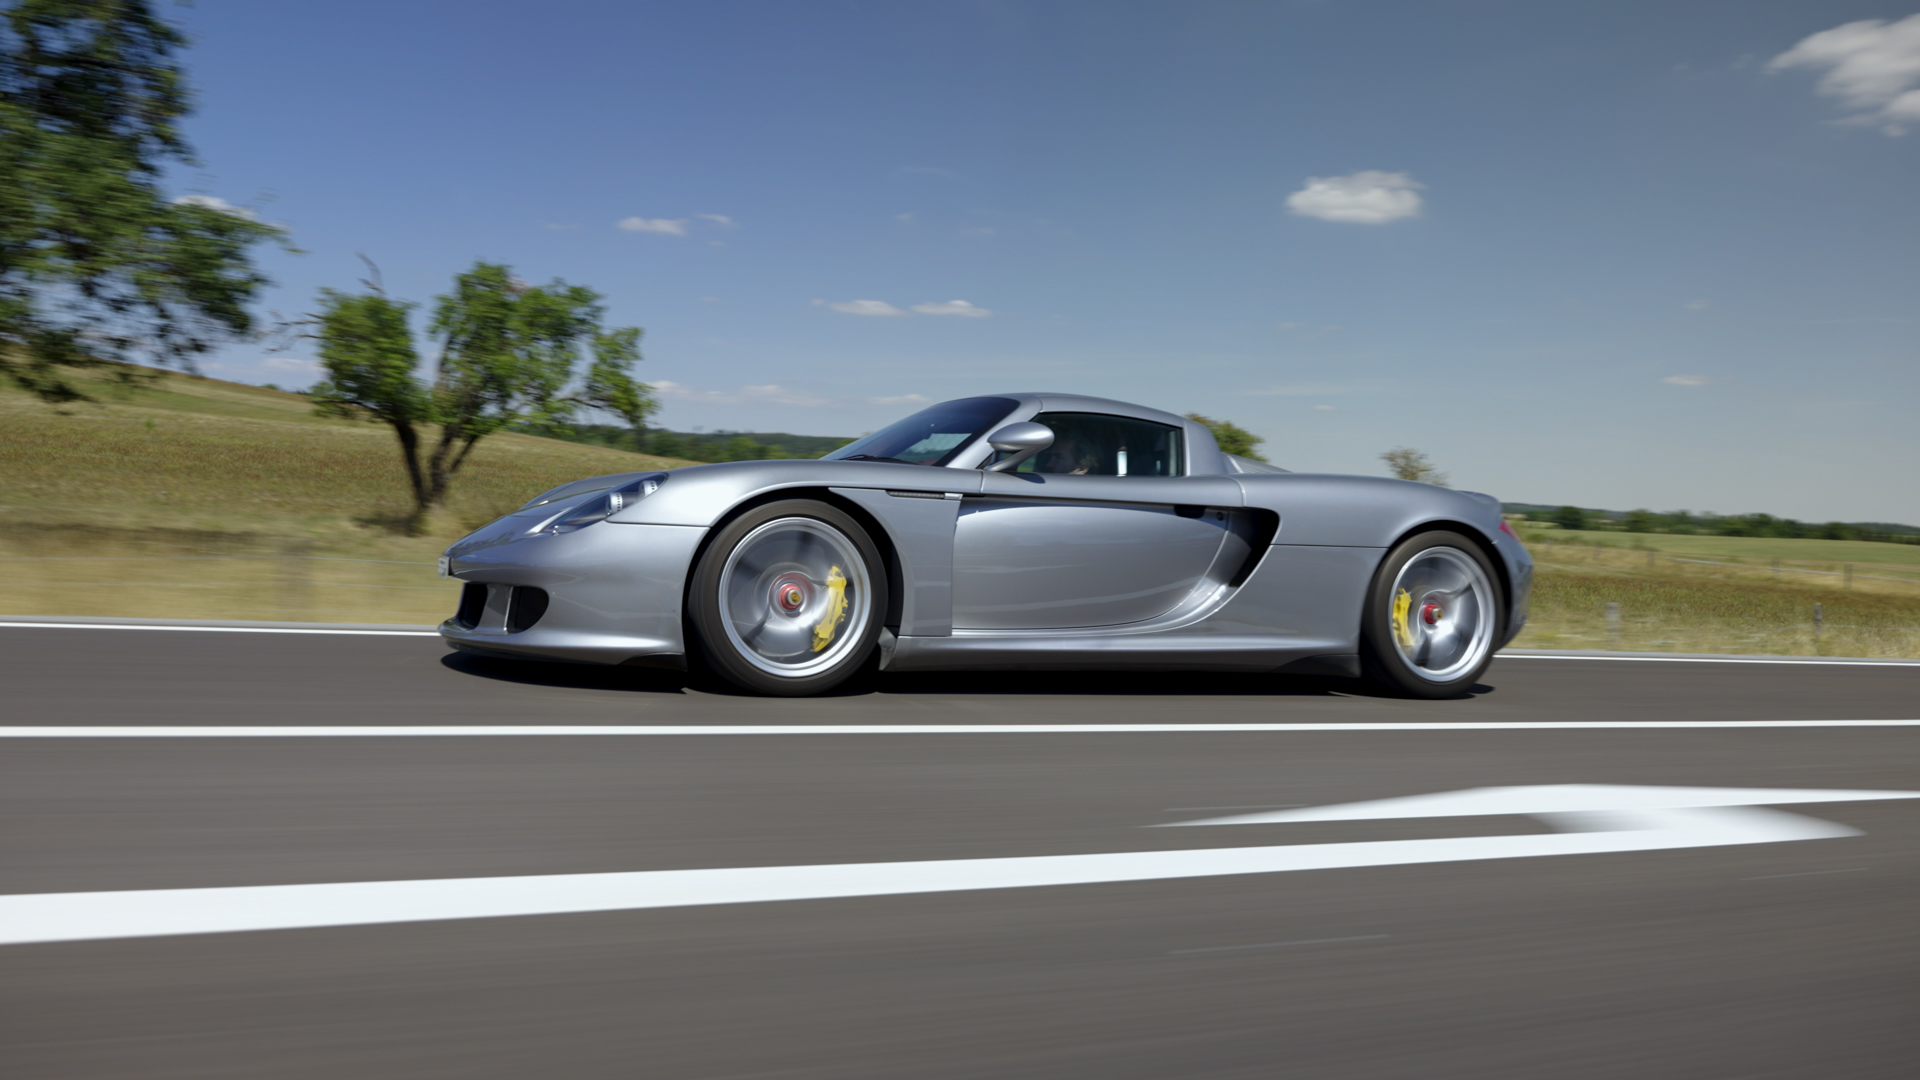 KW Finally Fixed the Porsche Carrera GT, So I Can Buy One Now